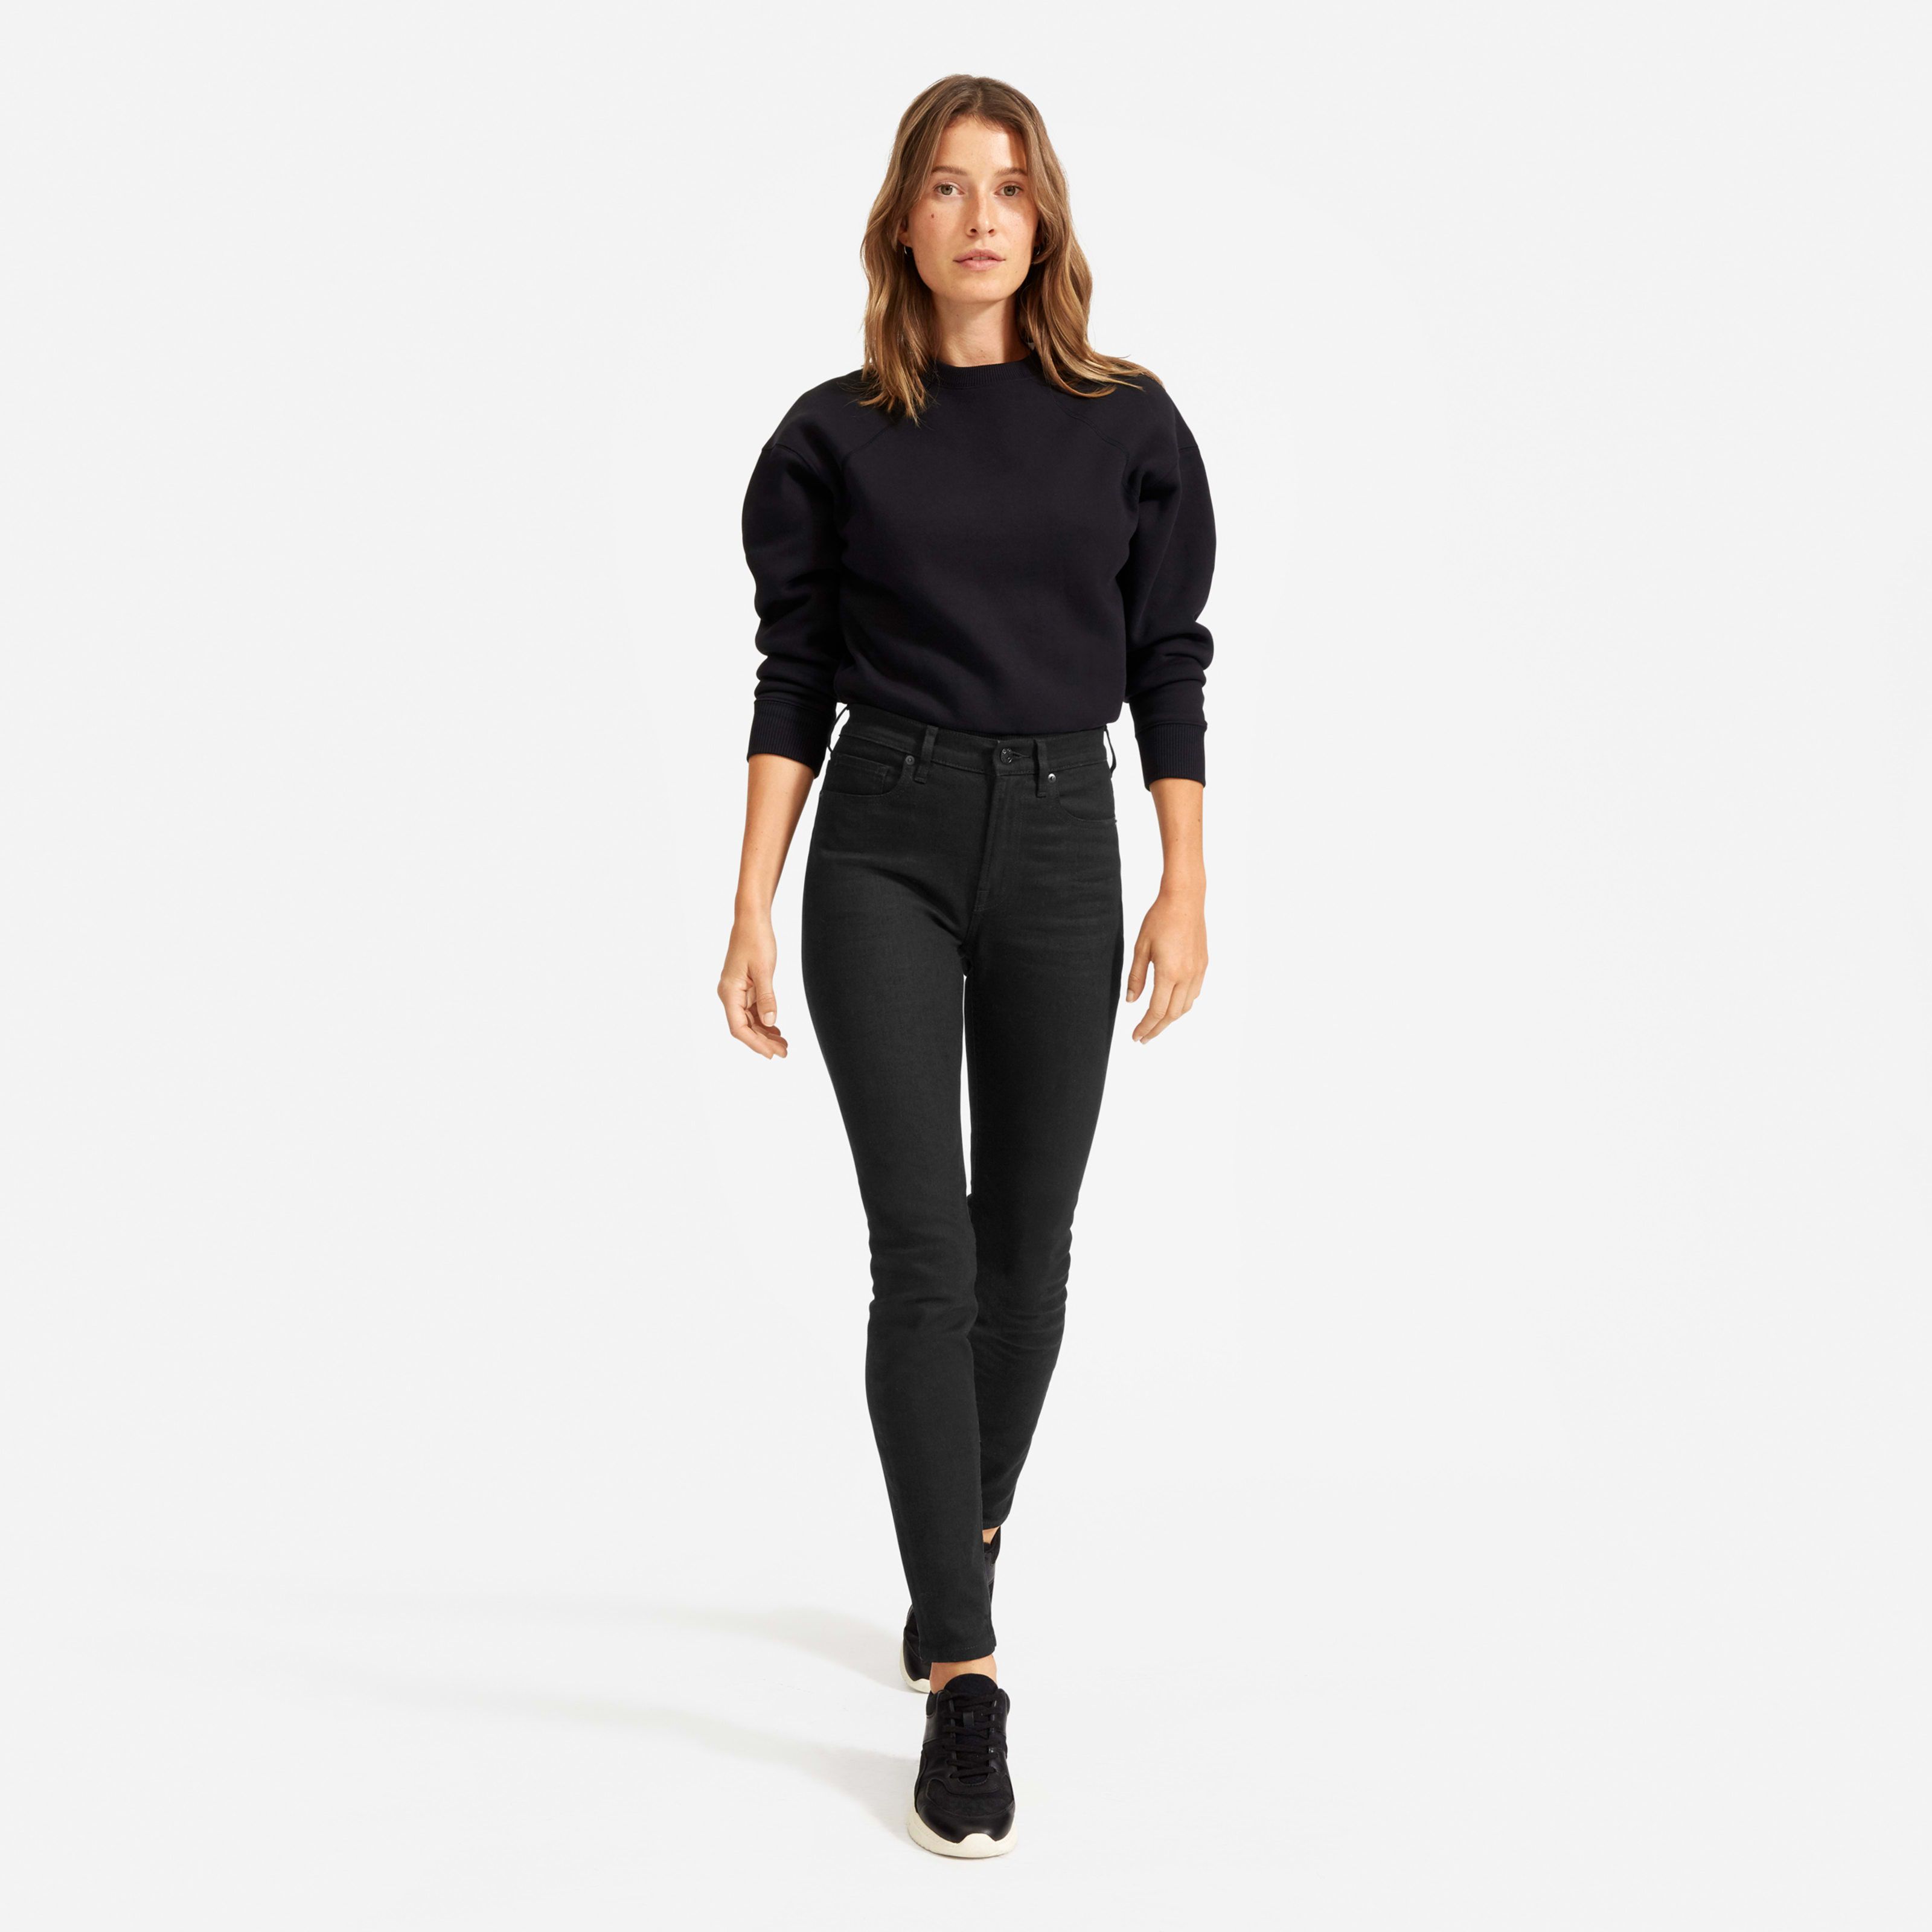 Women's High-Rise Skinny Jean by Everlane in Black, Size 33 | Everlane